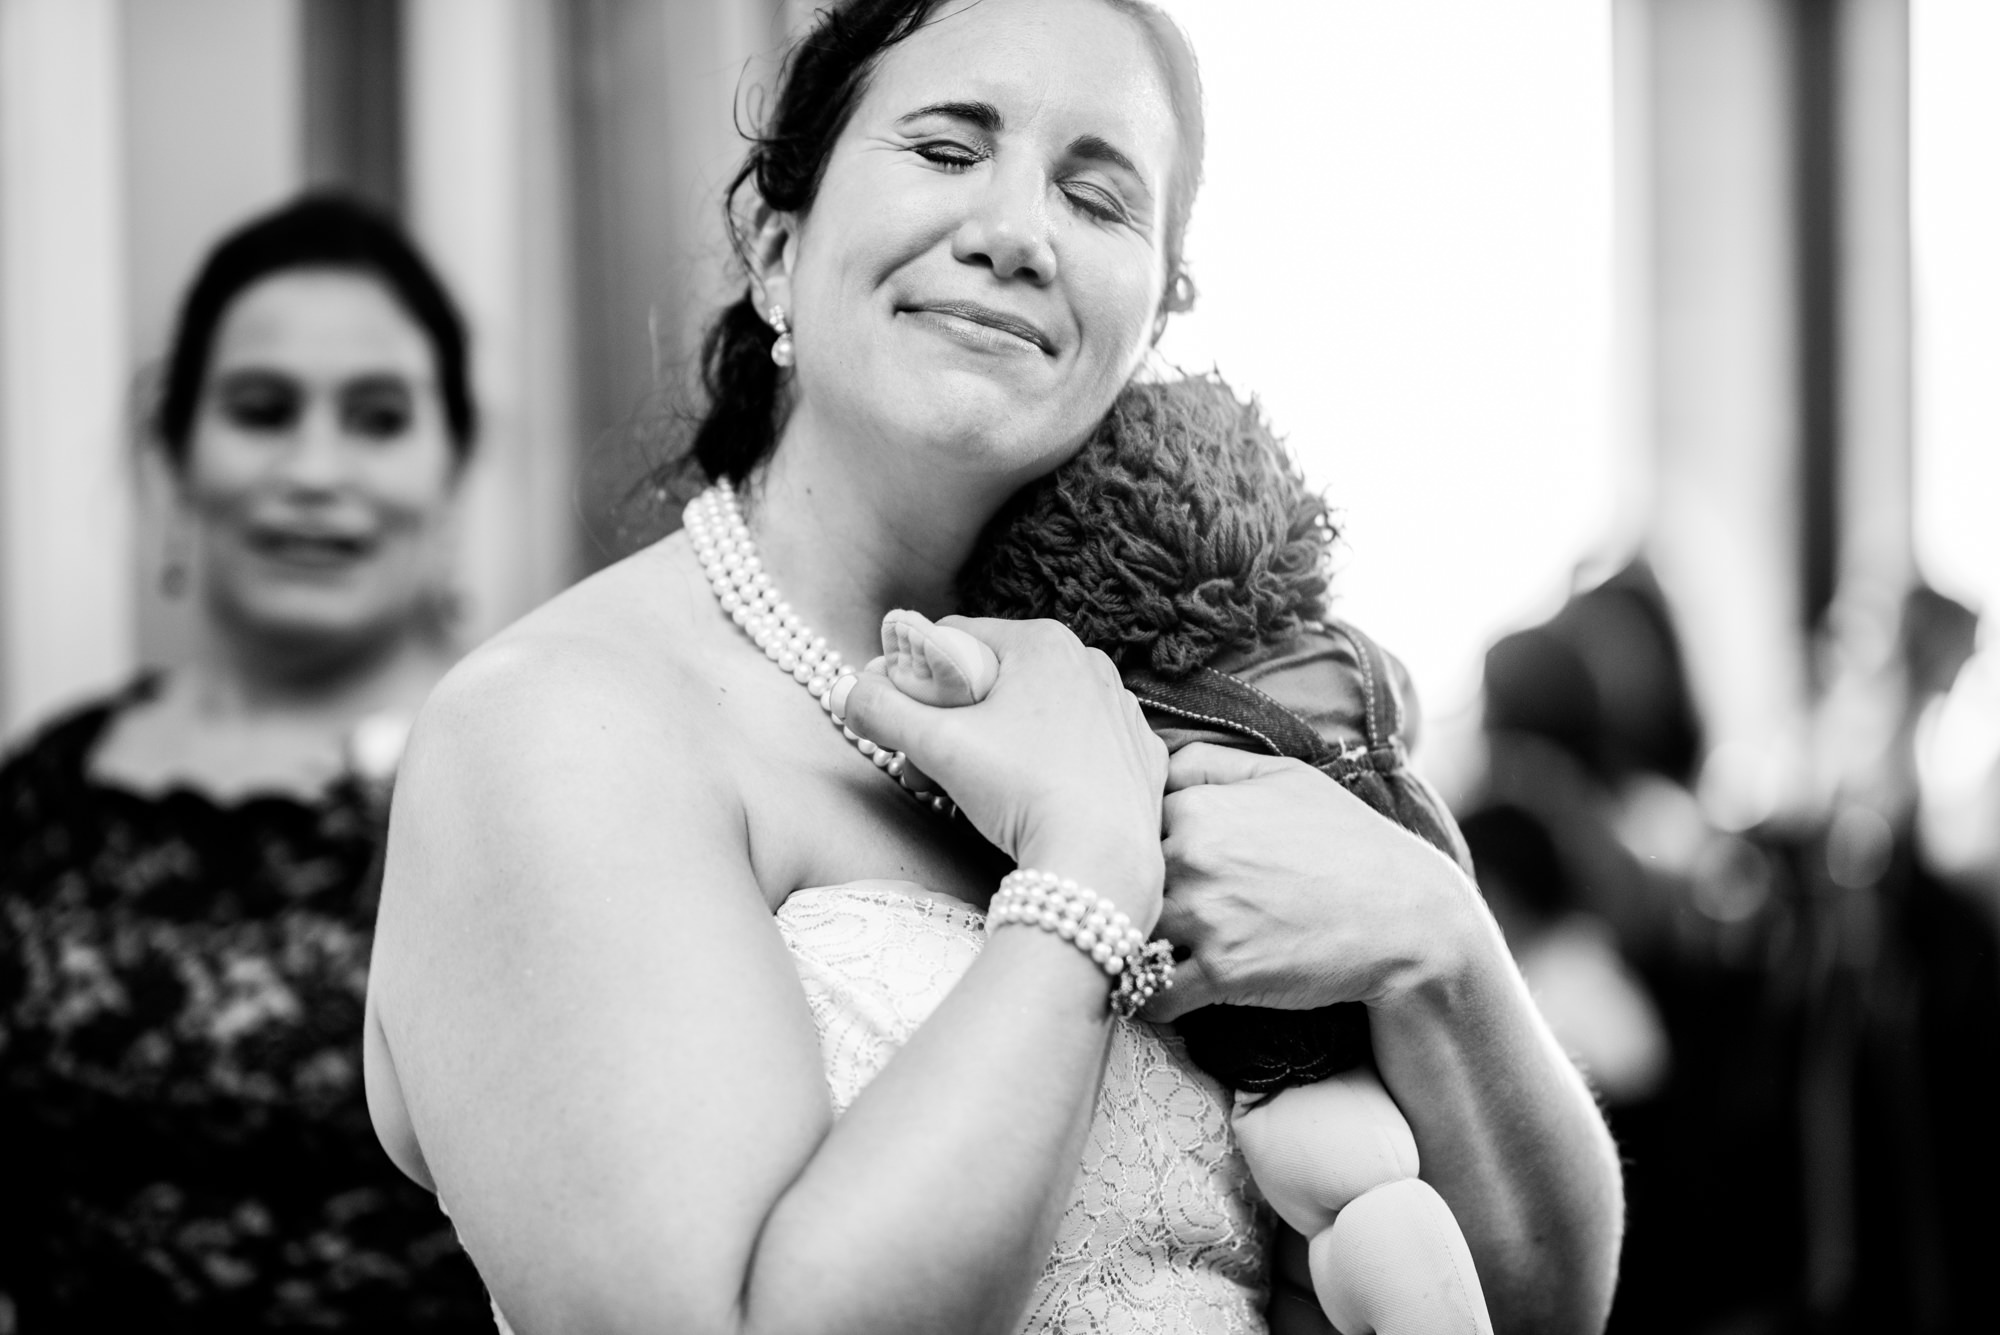 Joelle is given her childhood cuddle toy as a surprise after her siblings' toast, which was mentioned during the performance. Summer 2016. Seattle Tennis Club. Photo by Seattle Wedding Photographers Jennifer Tai Photo Artistry.